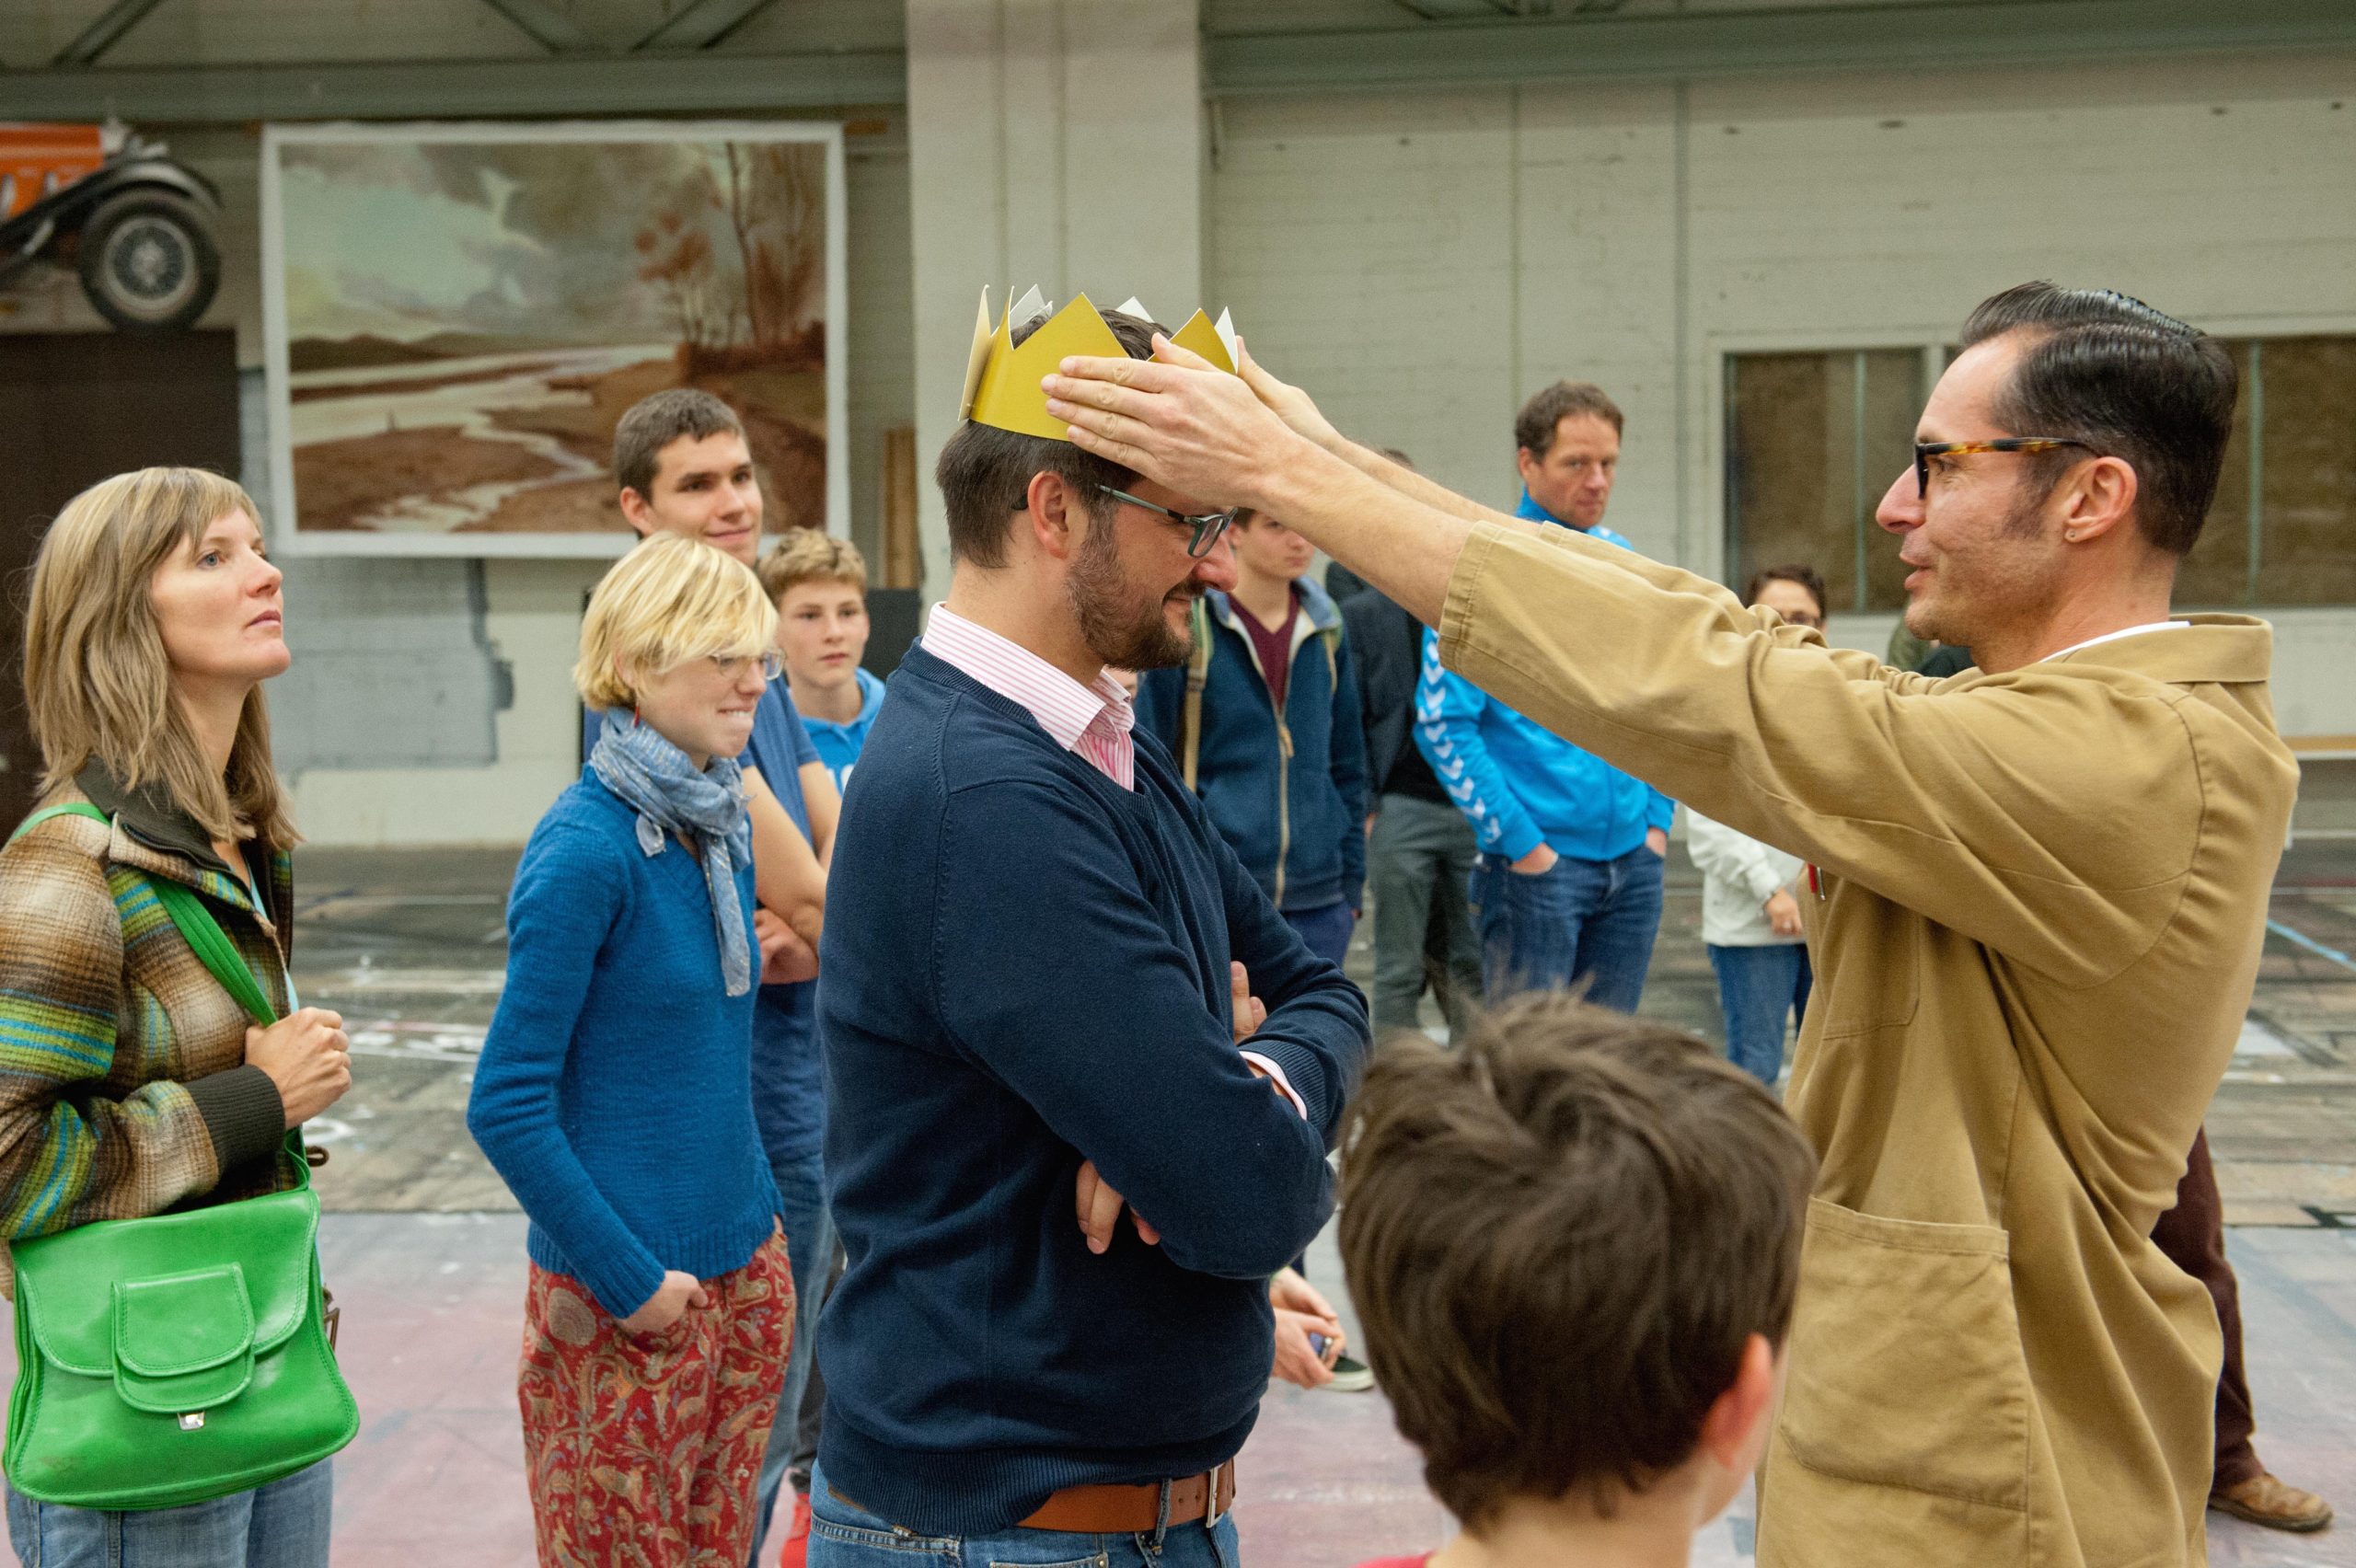 A member of the public is crowned by the Warehouse attendent.